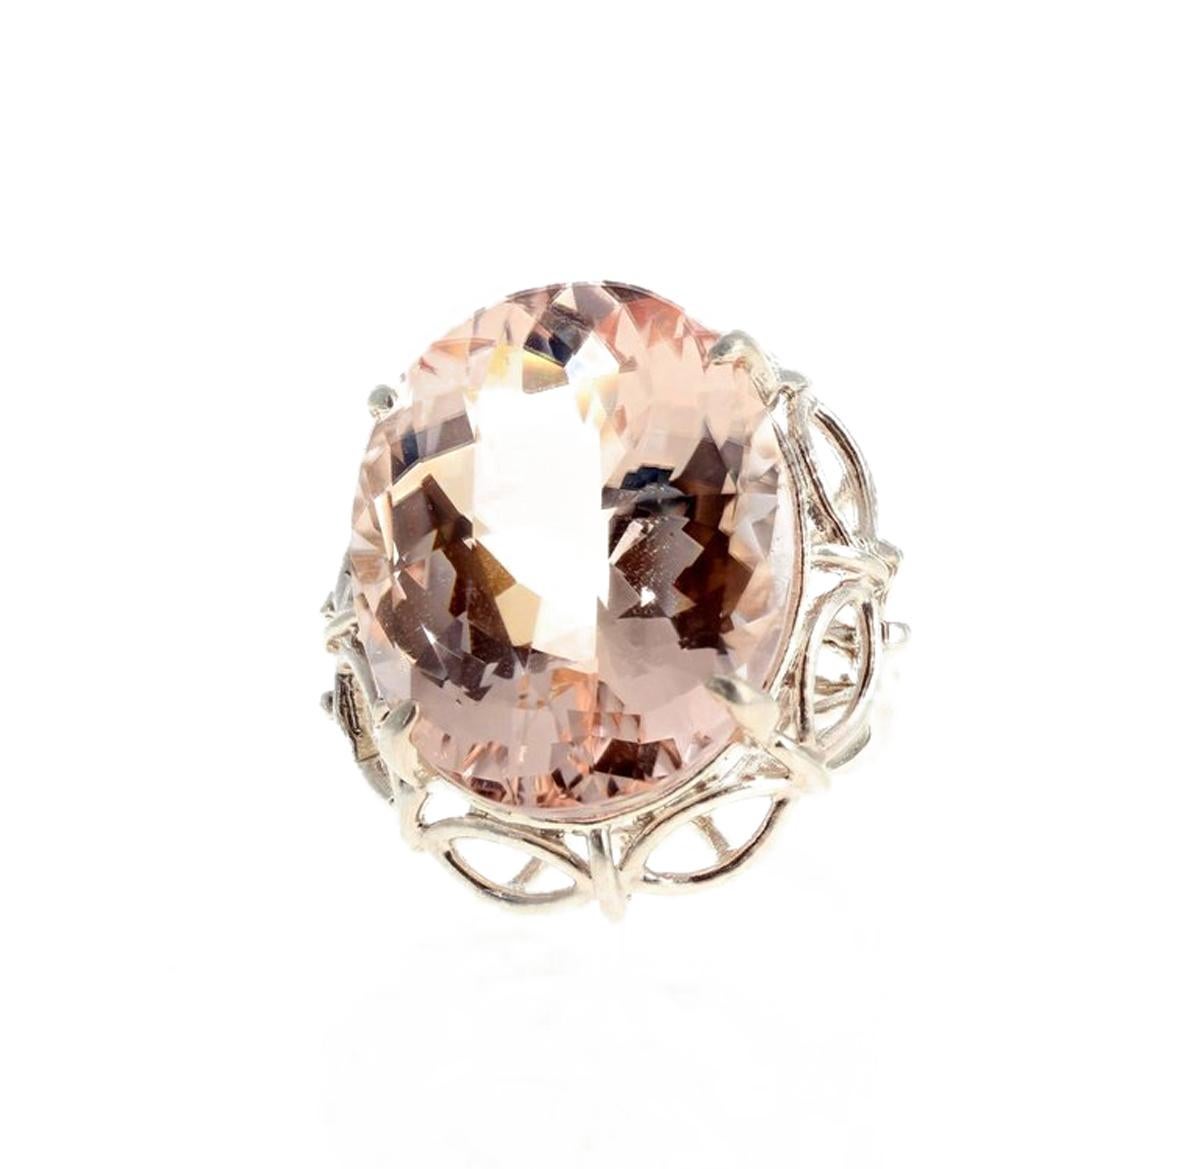 Women's or Men's AJD Enormous Glowing Clear 30 Ct. Morganite Sterling Silver Cocktail Ring For Sale